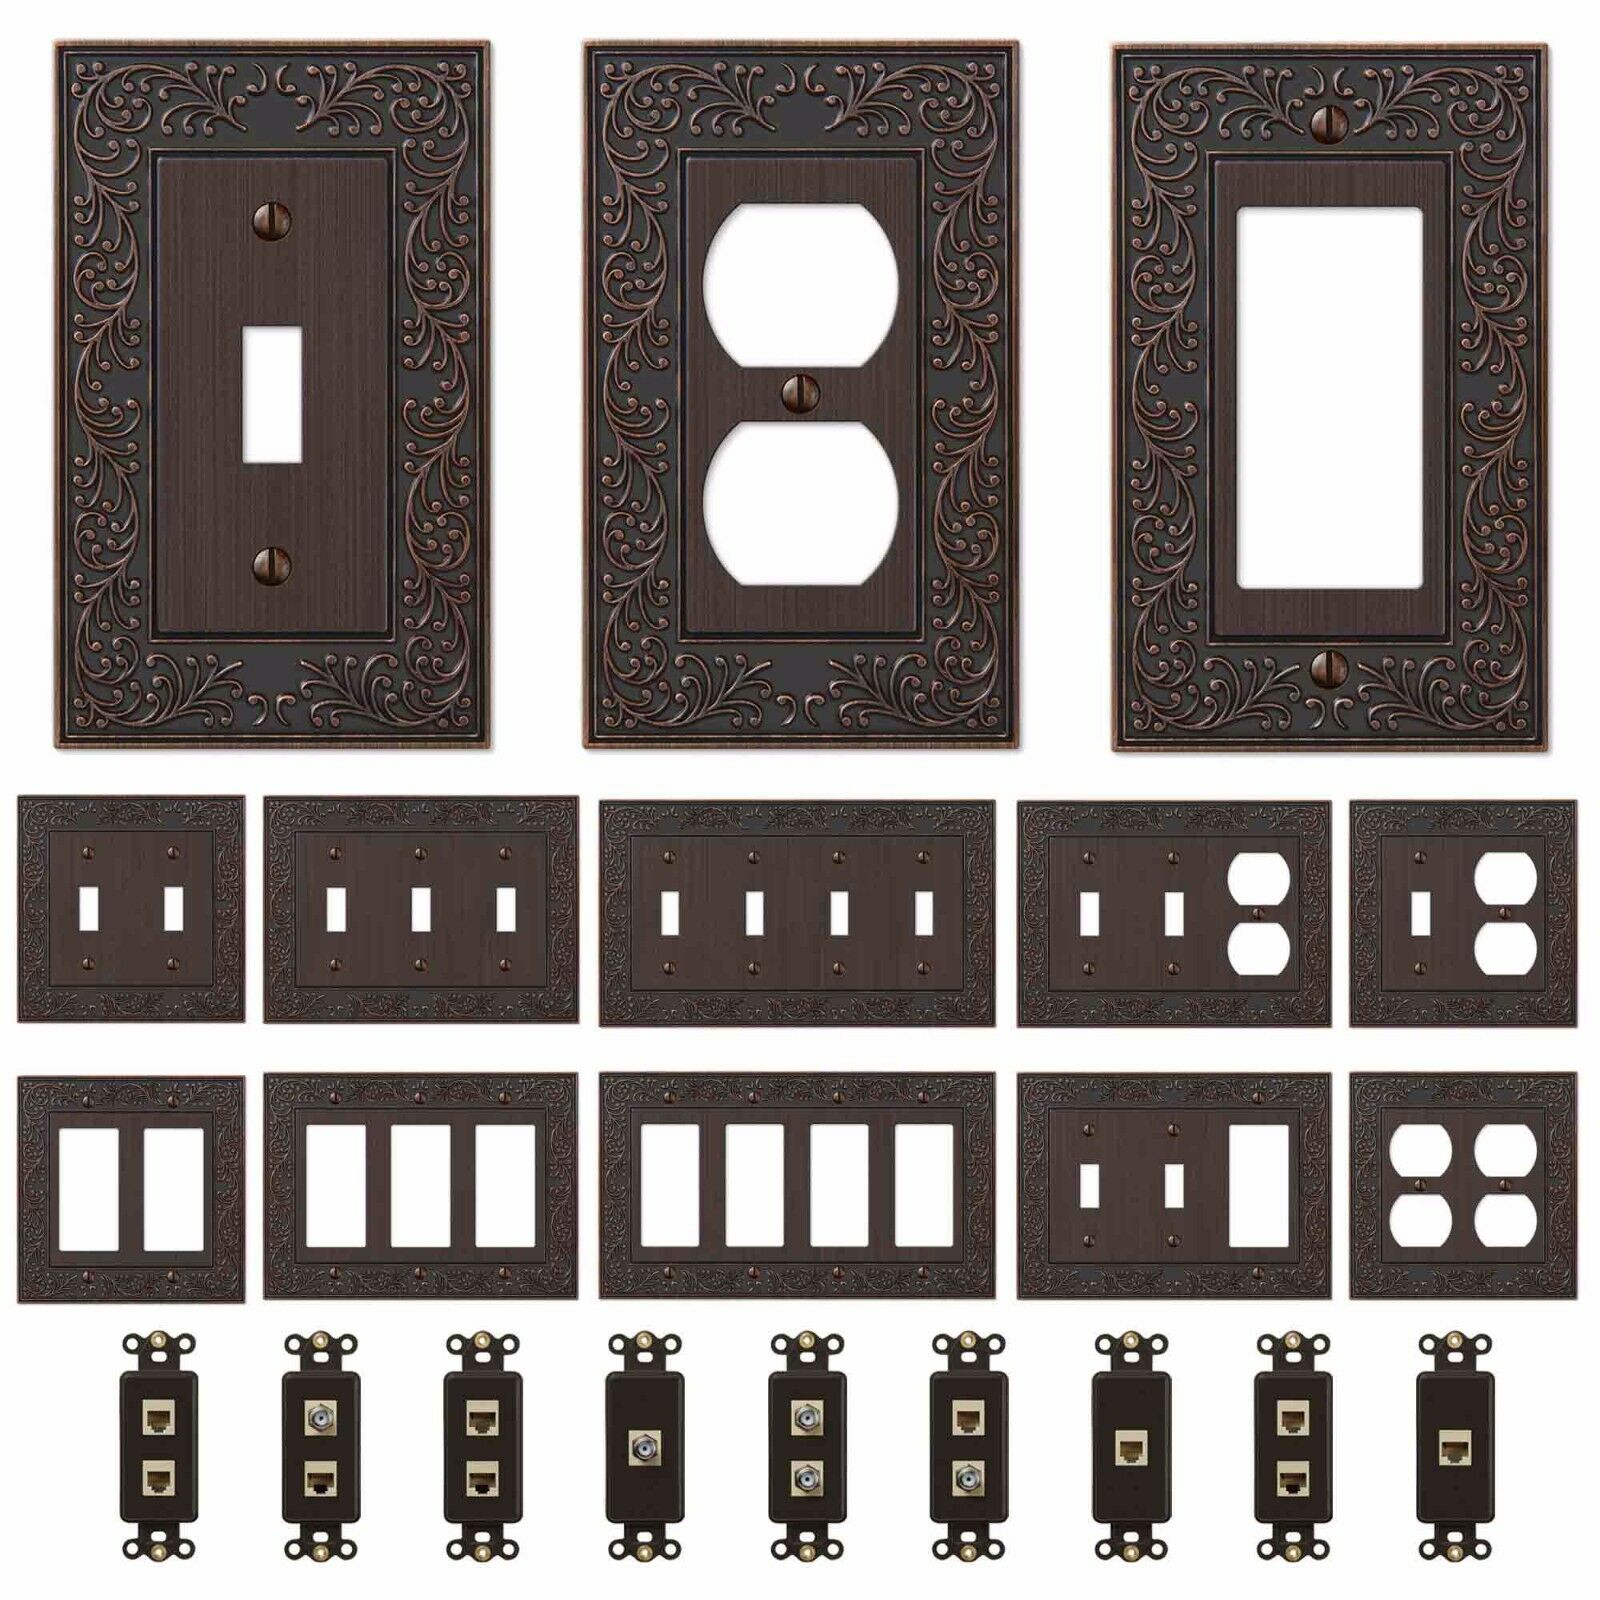 Oil Rubbed Bronze Wall Switch Plate Outlet Covers Ornate Floral Metal Wallplates